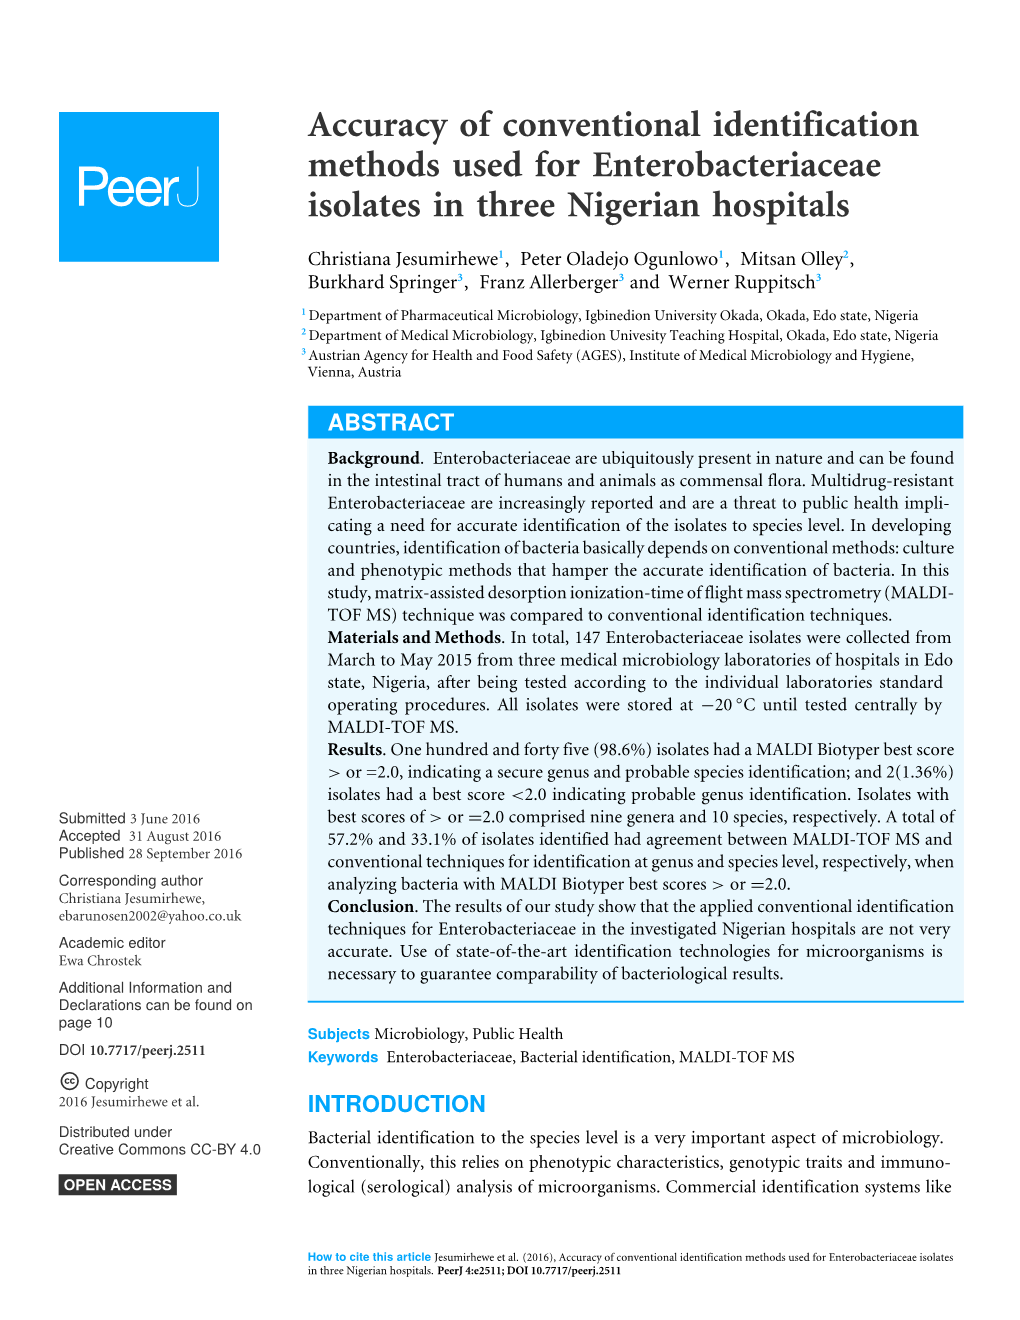 Accuracy of Conventional Identification Methods Used for Enterobacteriaceae Isolates in Three Nigerian Hospitals